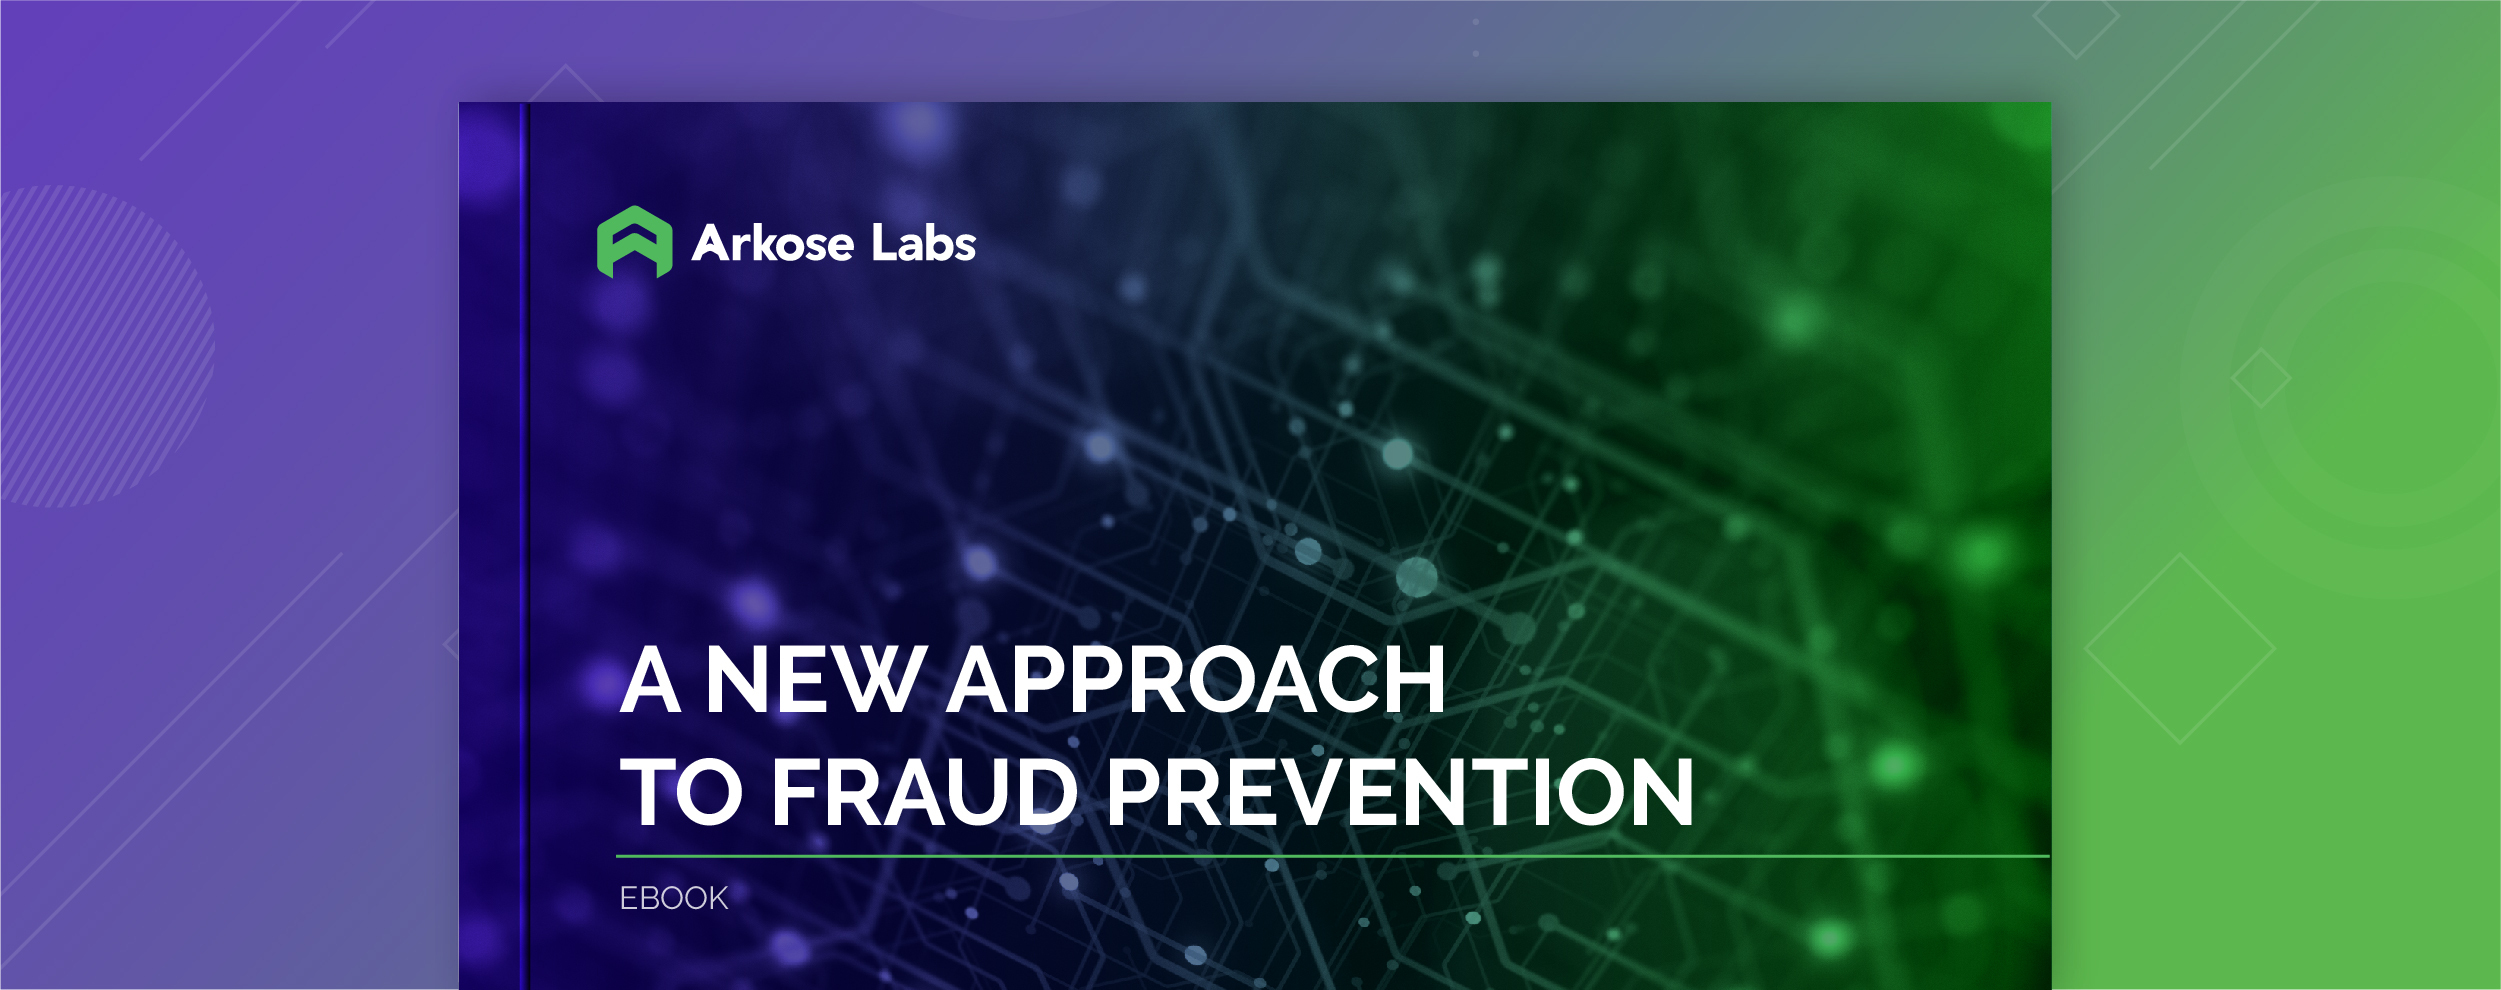 A New Approach to Fraud Prevention ebook